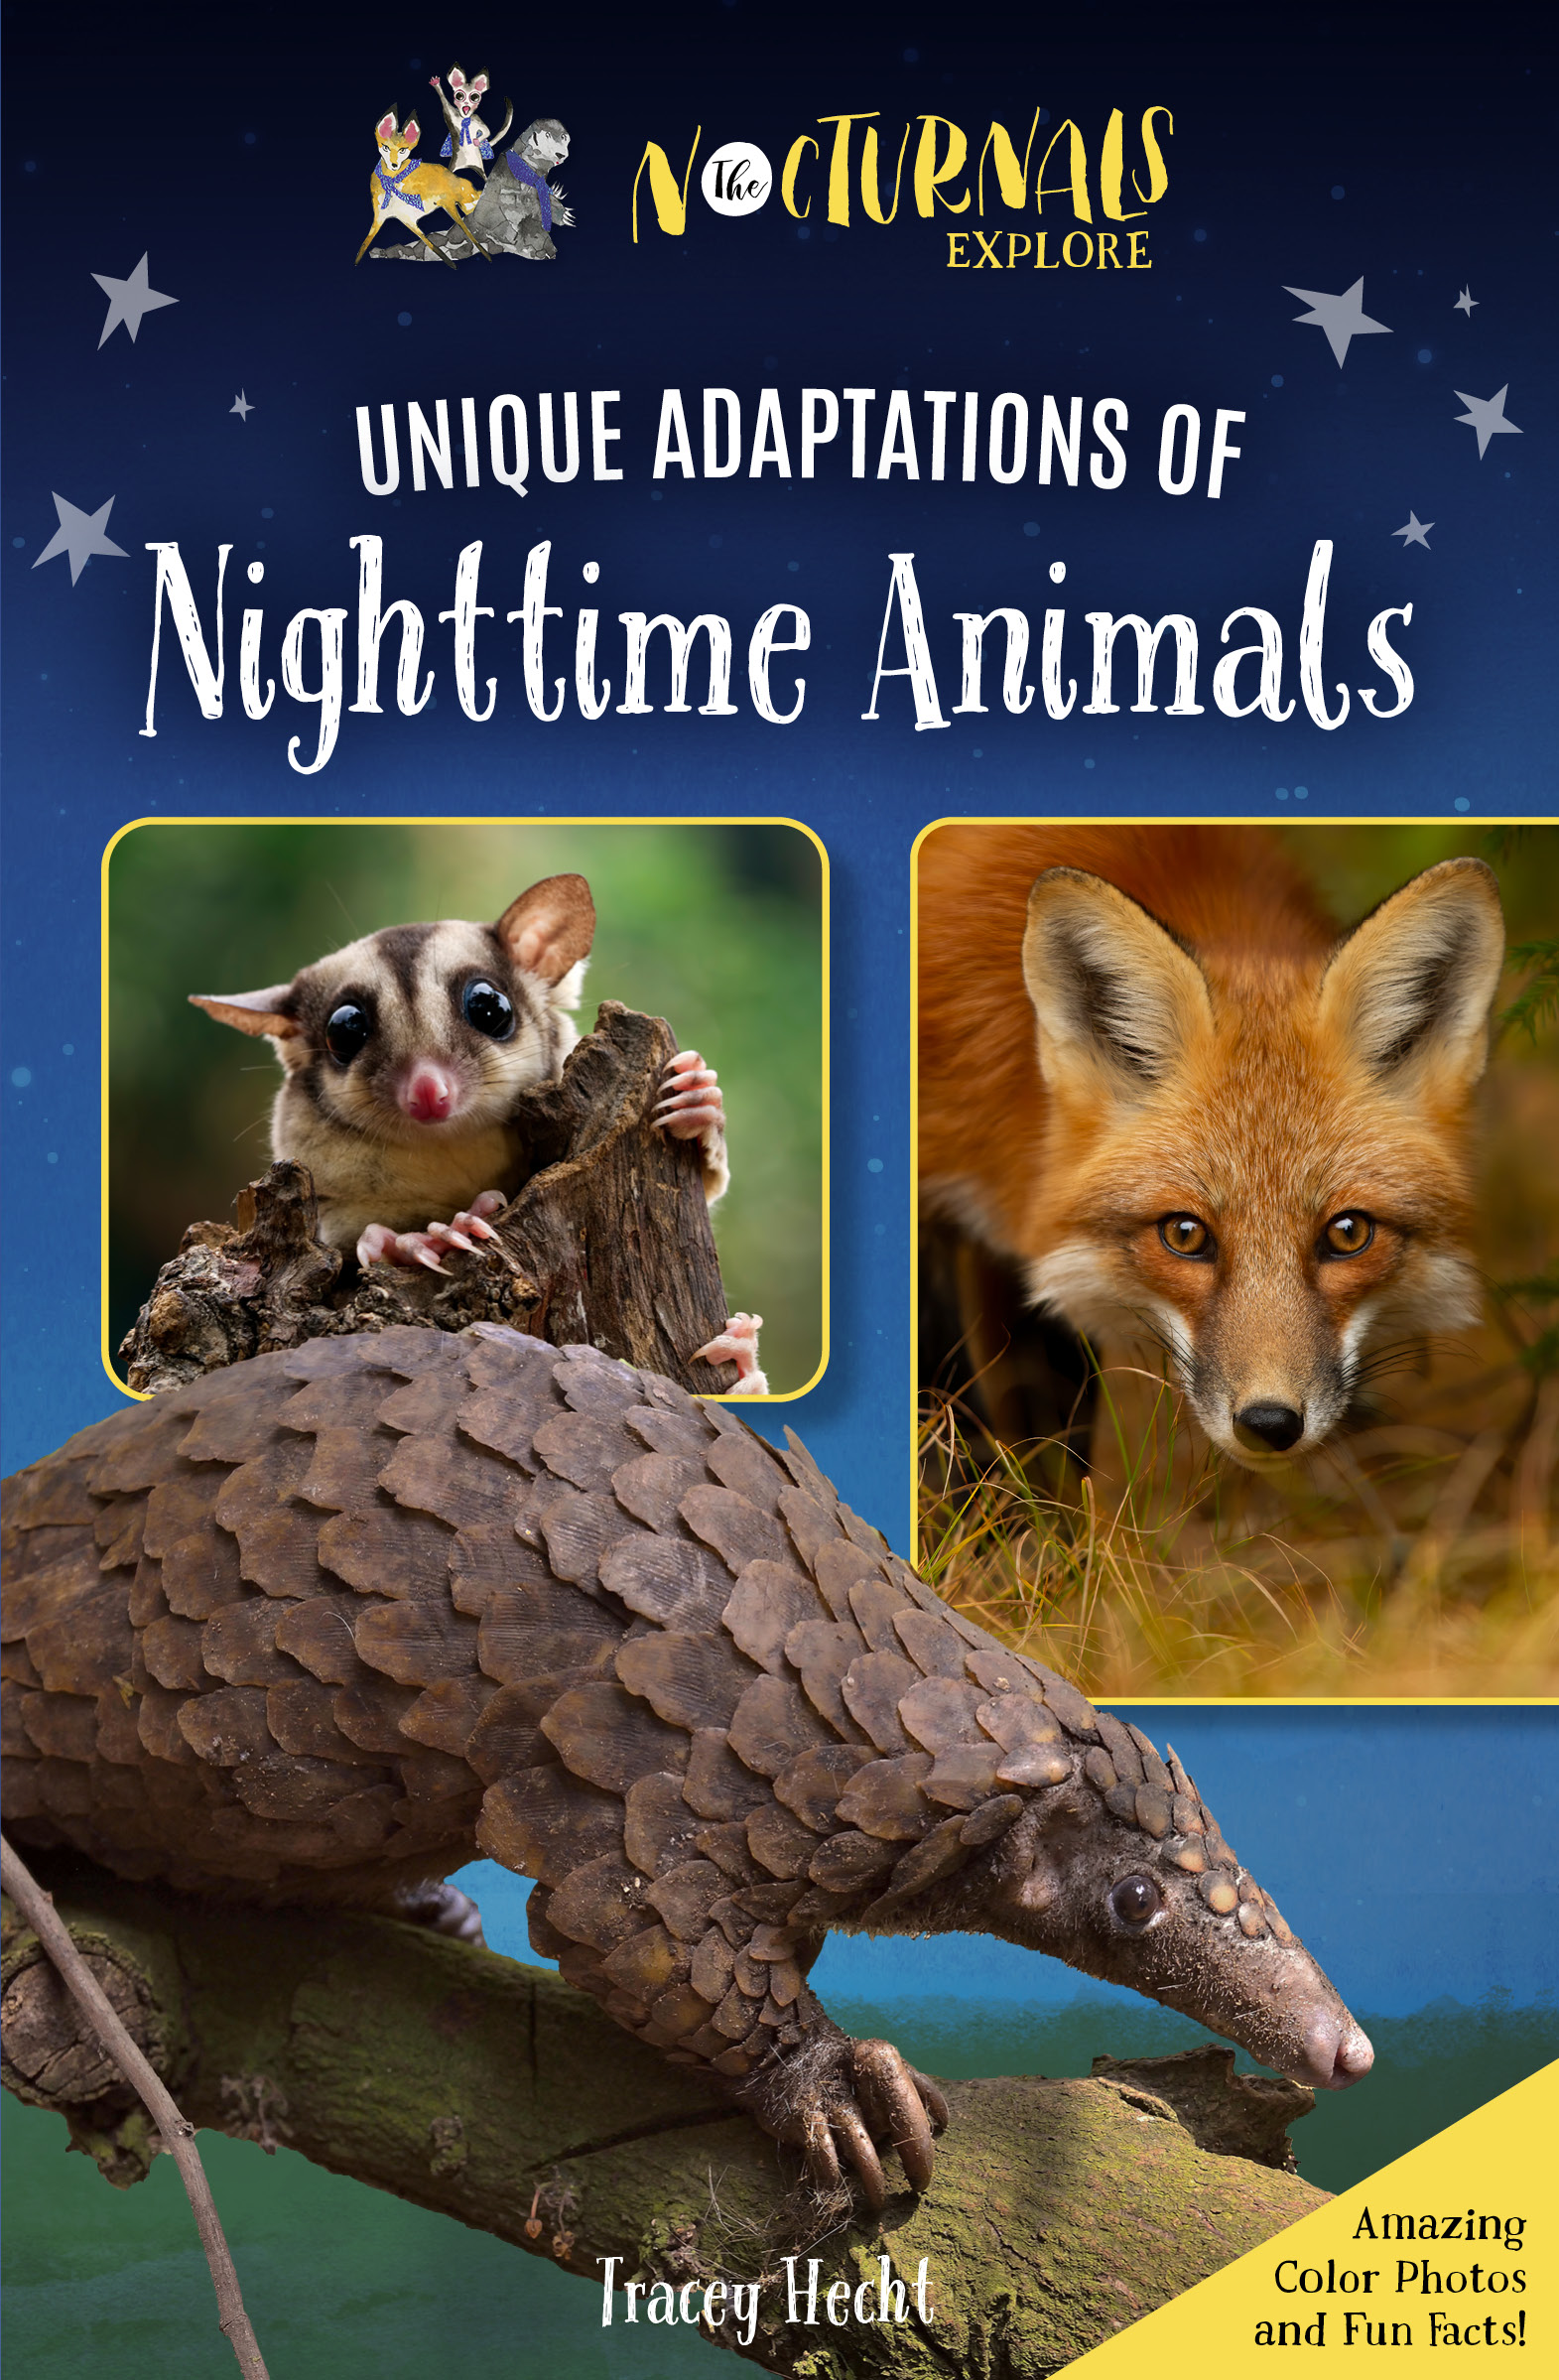 the nonfiction chapter book companion to The Mysterious Abductions has a dark blue cover with a photograph of a pangolin climbing a tree branch on the front. Behind the pangolin on the left is a picture of a real sugar glider and on the right is a real picture of a fox. 